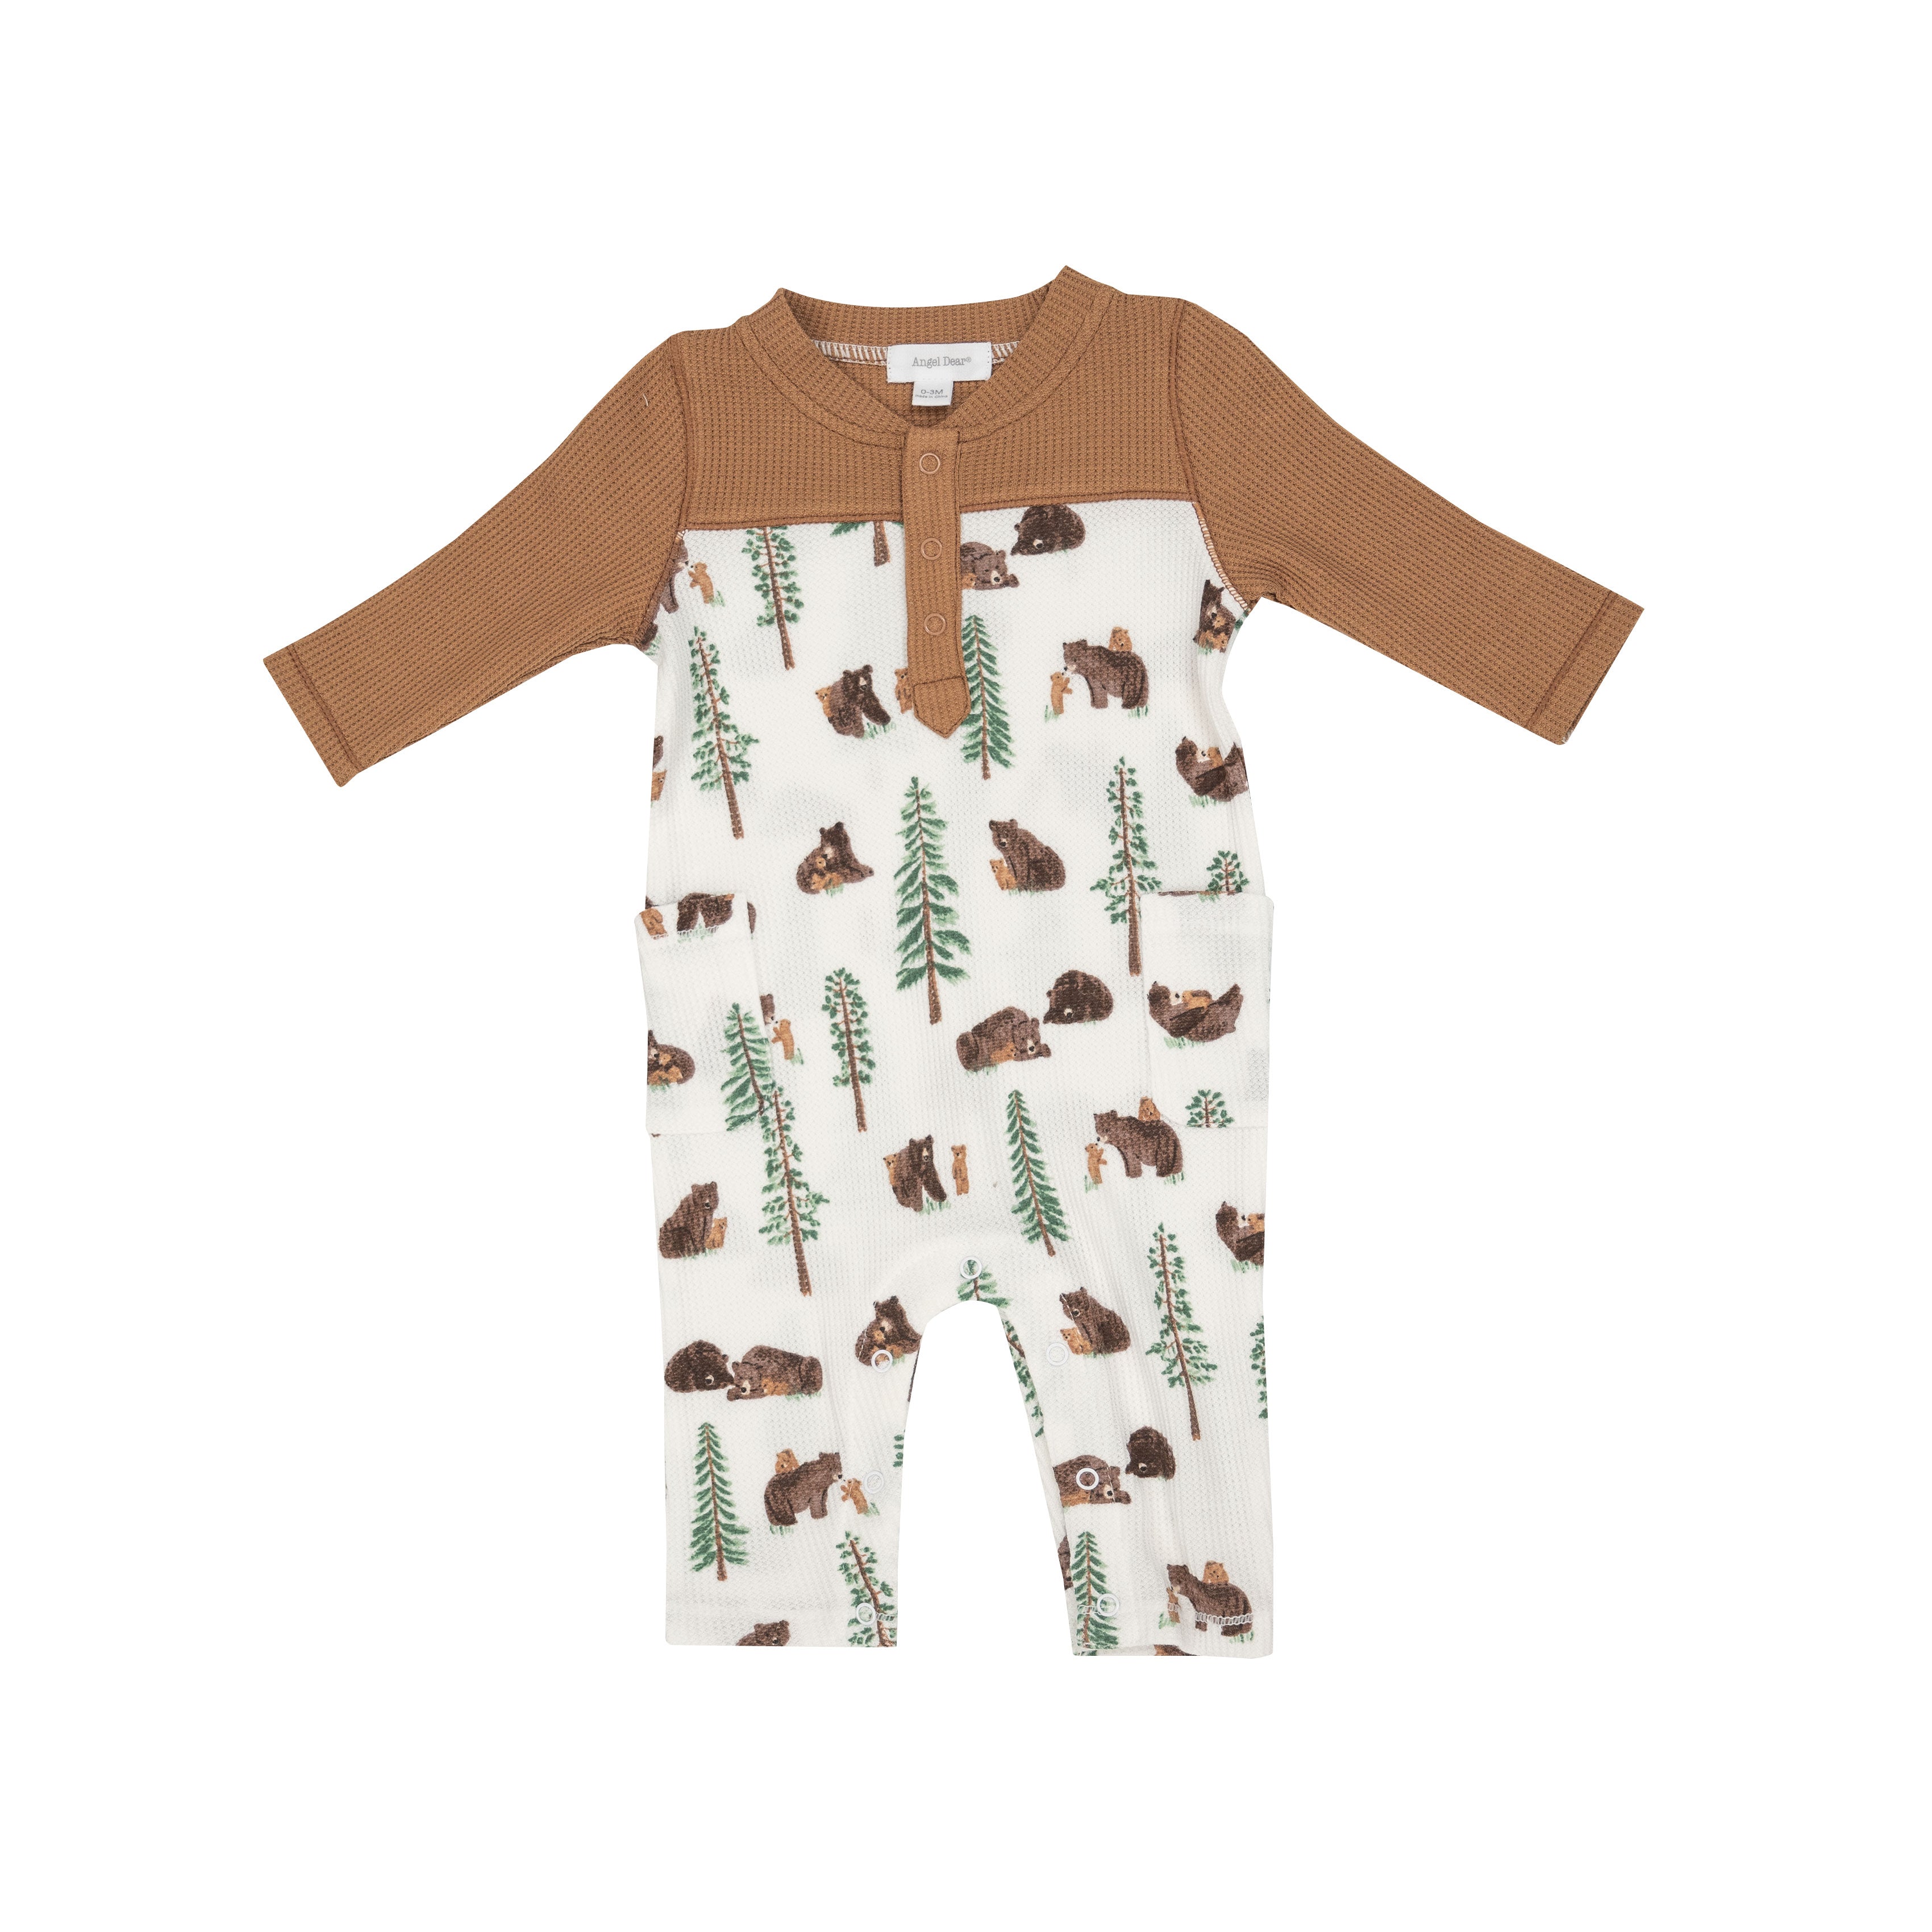 Romper with brown sleeves and collar with a white body with a bear and trees print